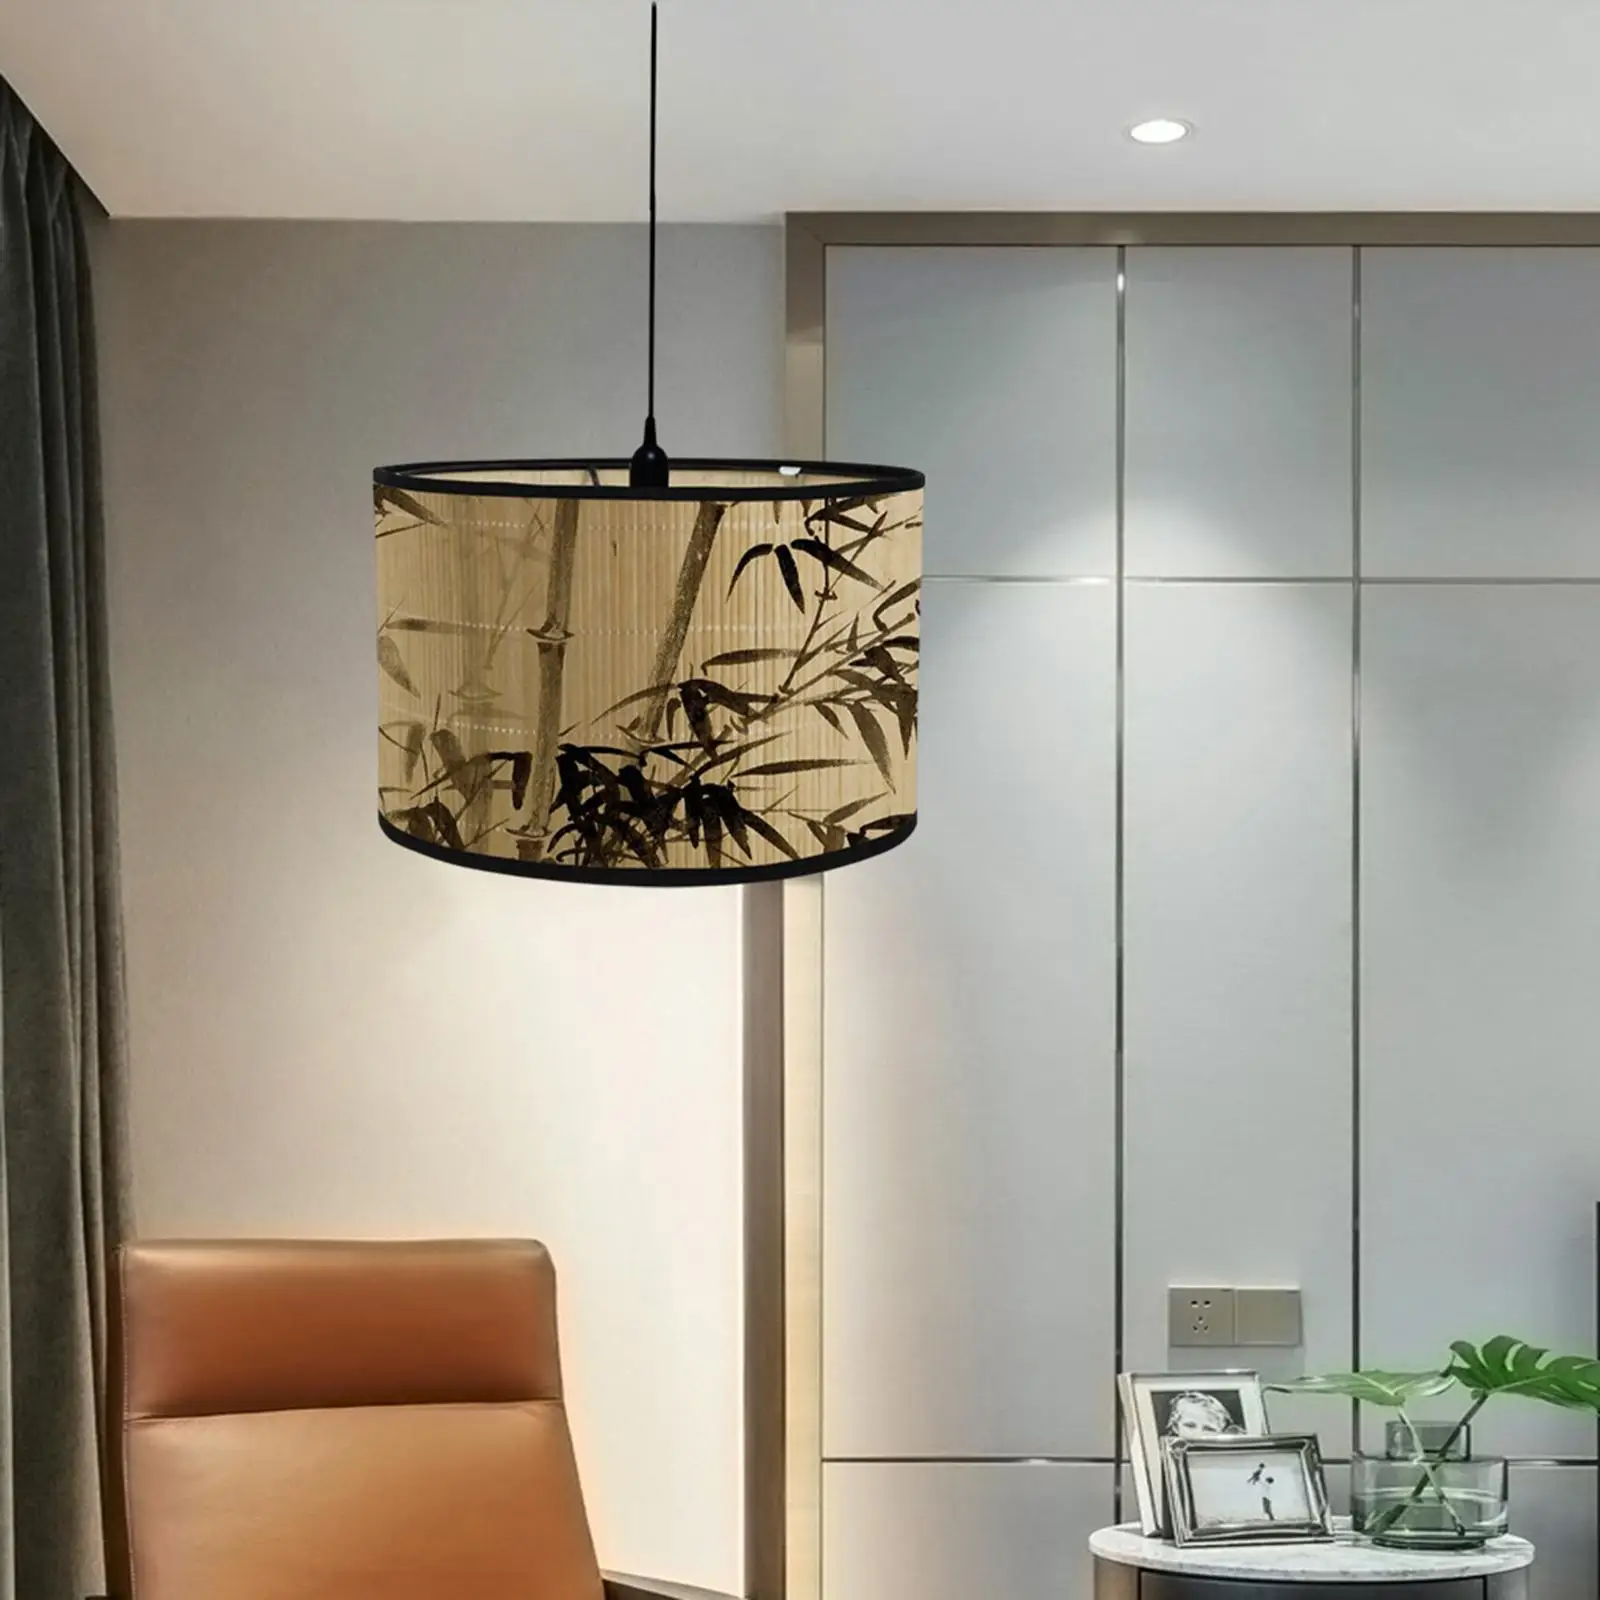 Rustic Bamboo Lampshade Ceiling Light Cover Hanging Pendant Light Chandelier for